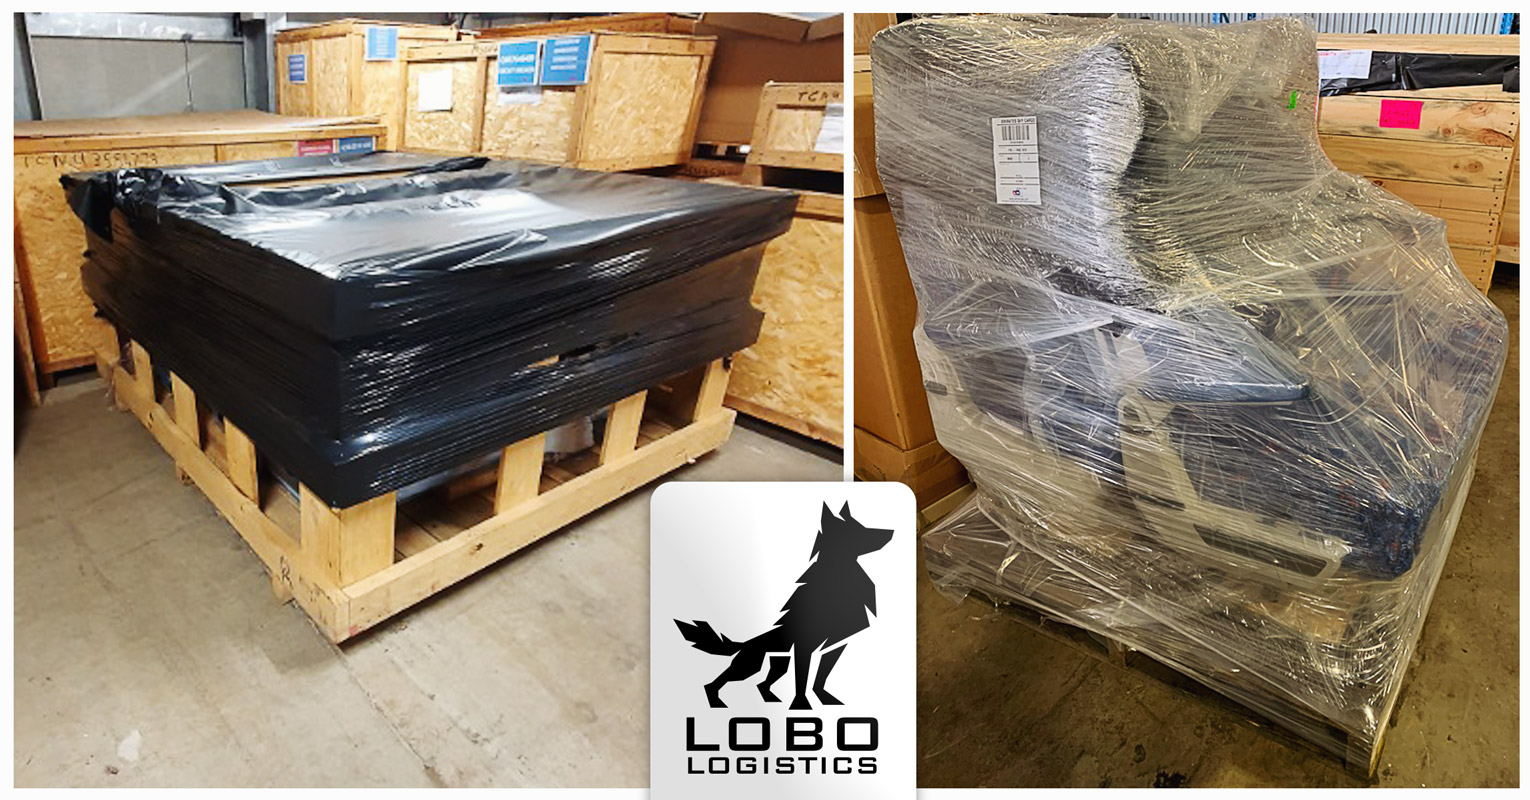 Lobo Logistics has Been Keeping Active with FCL and Small Airfreight - Here are Two Train Seats Destined for France and Some other Airfreight